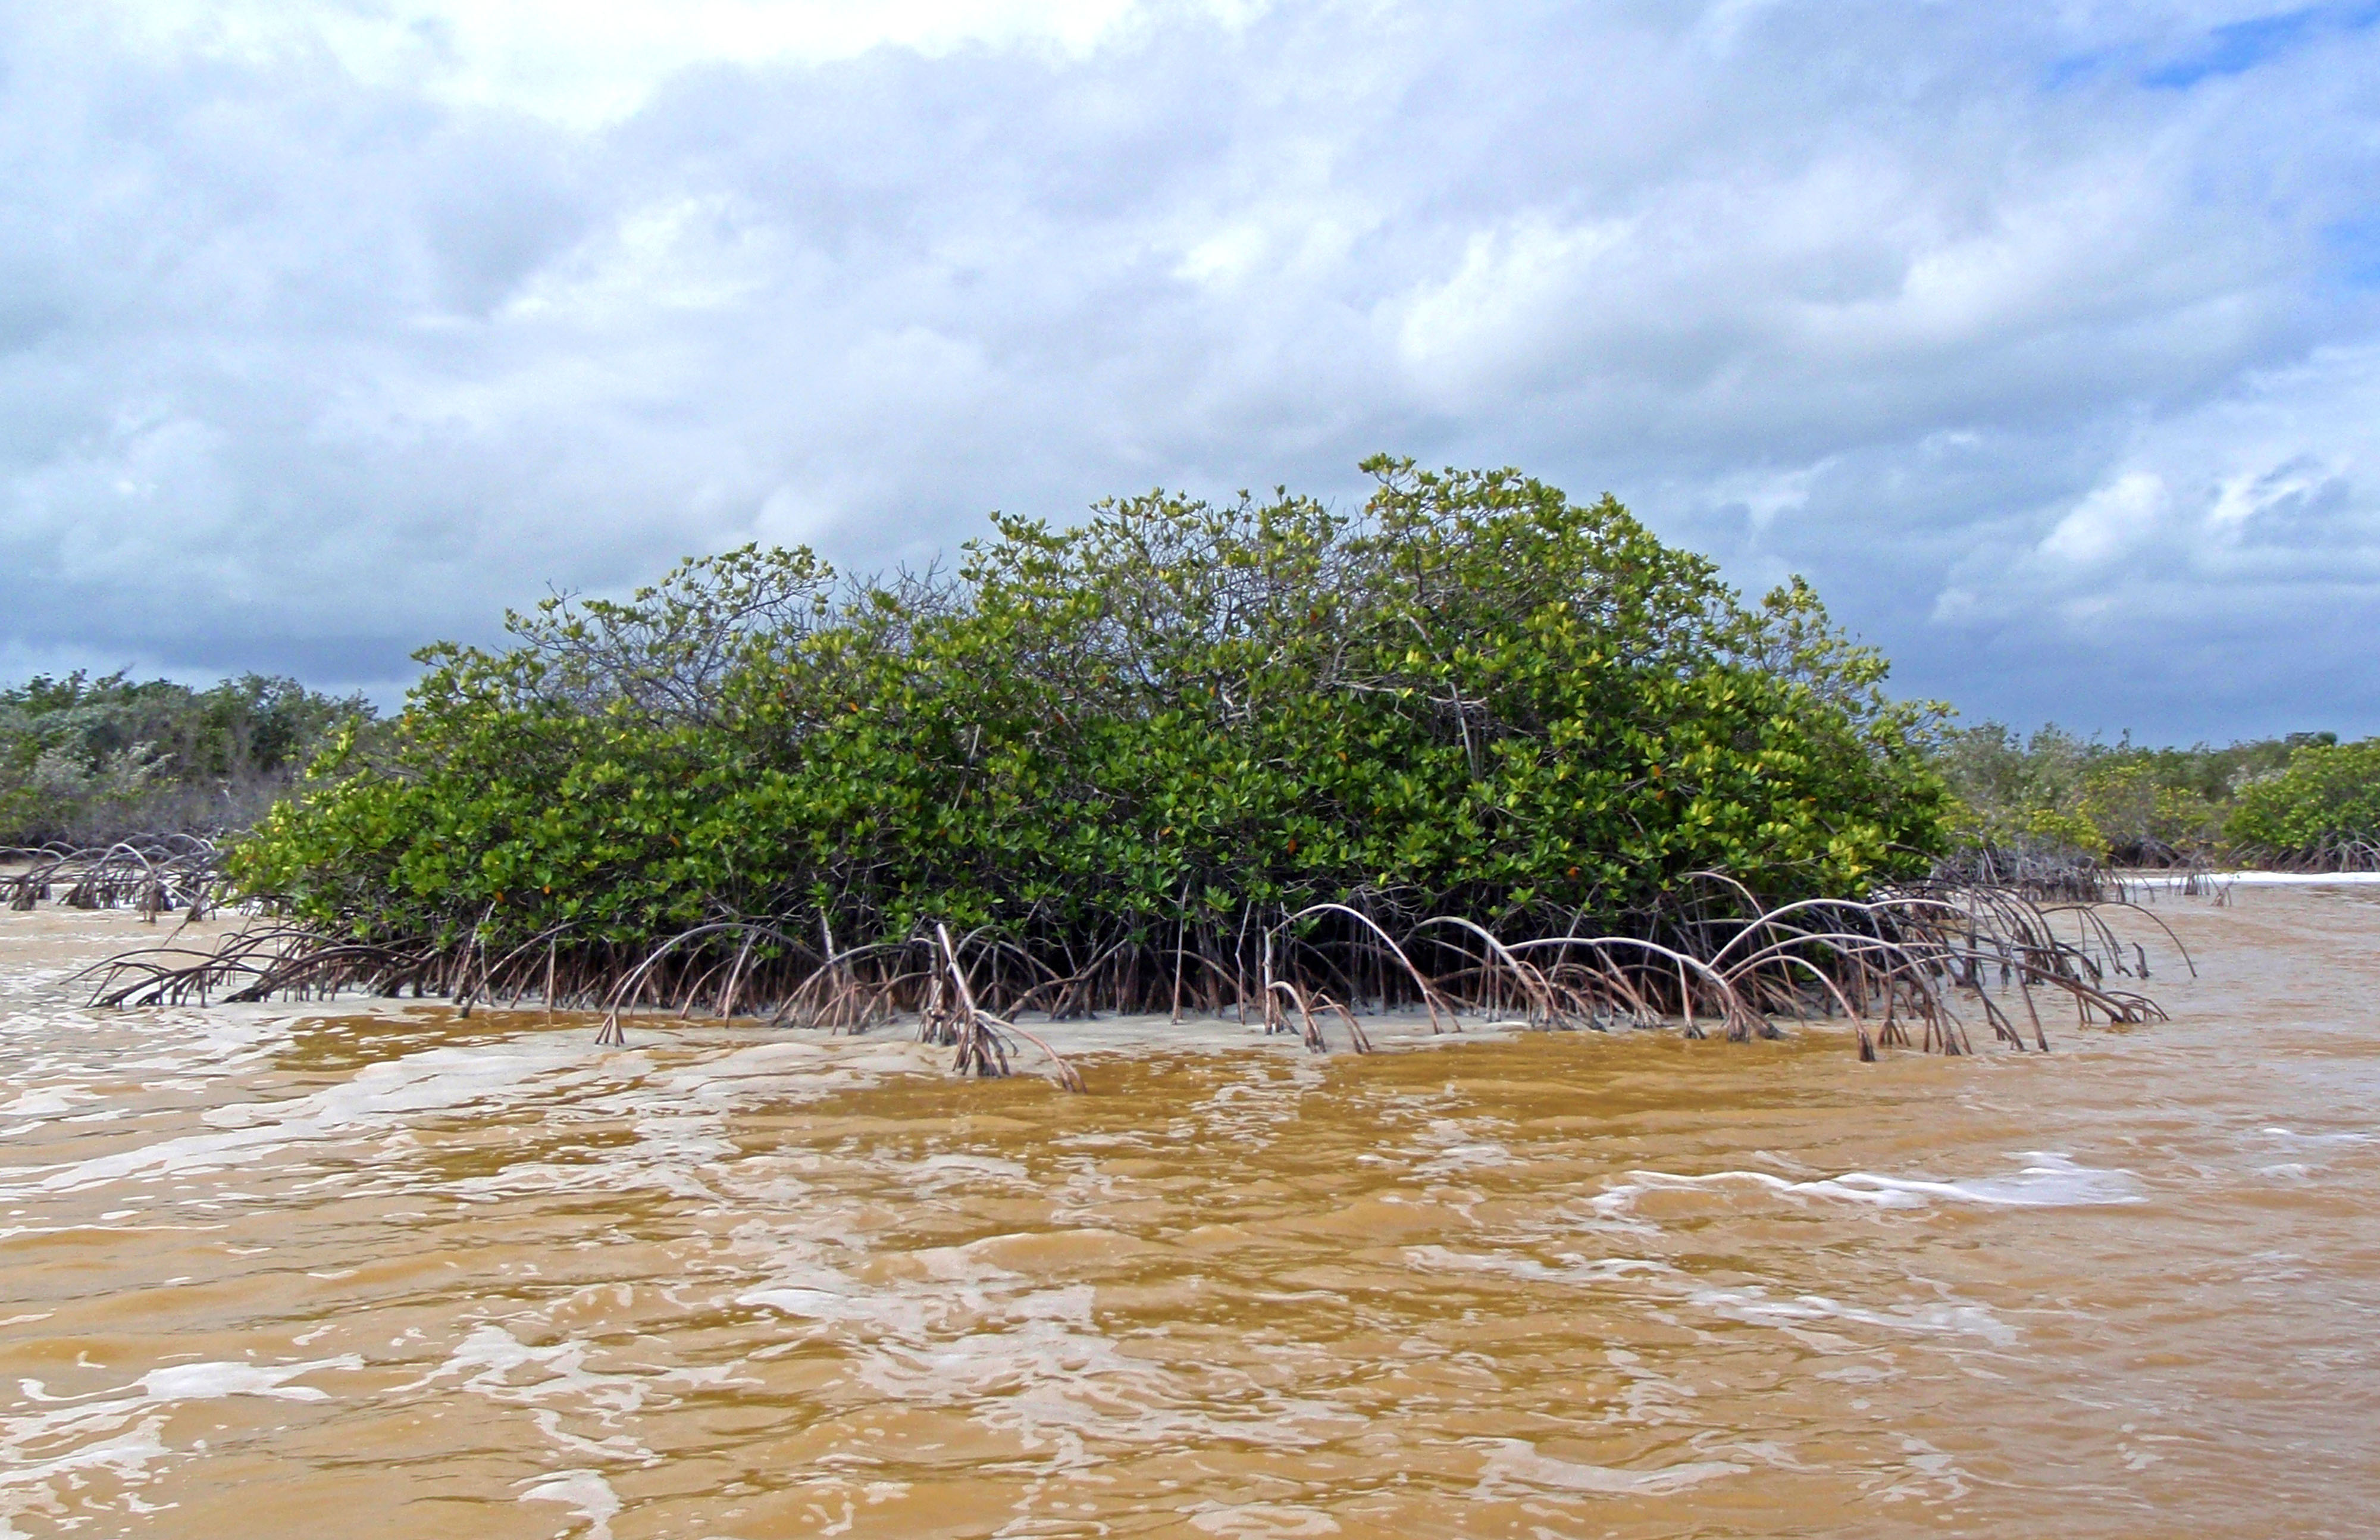 A large stand of mangroves near muddy water's edge.